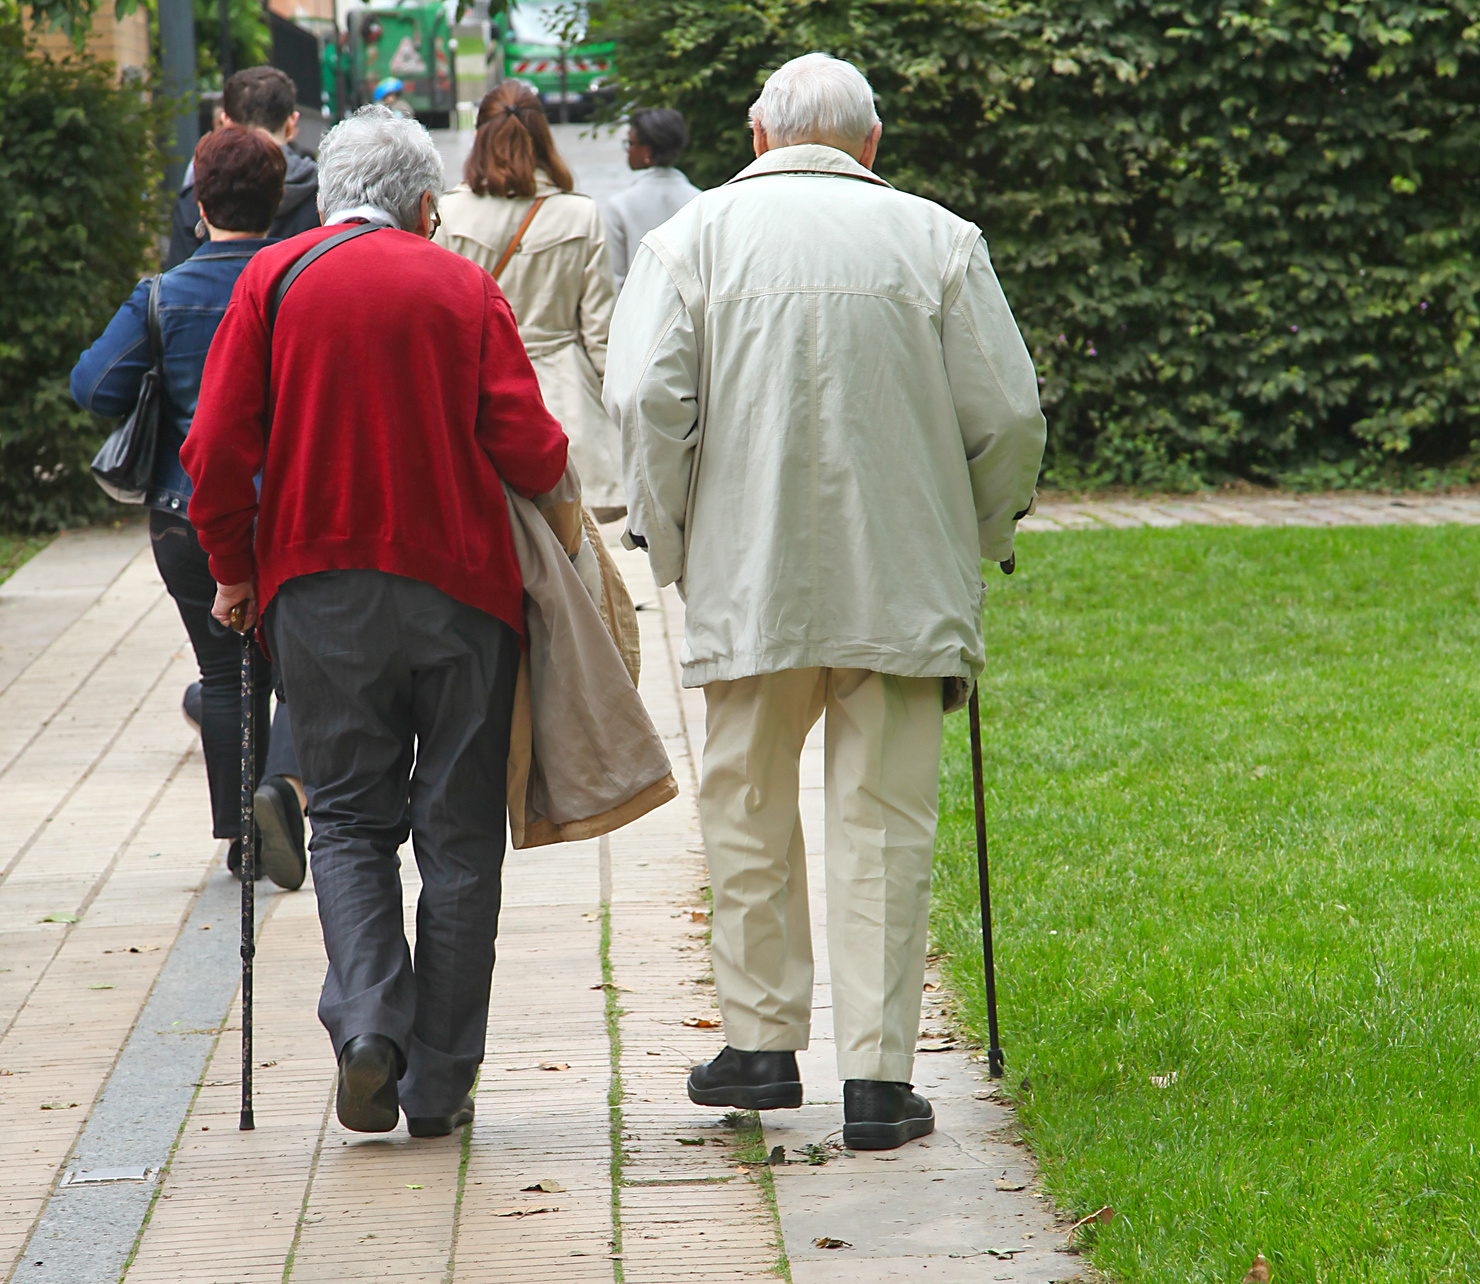 Solutions shared to an ageing population